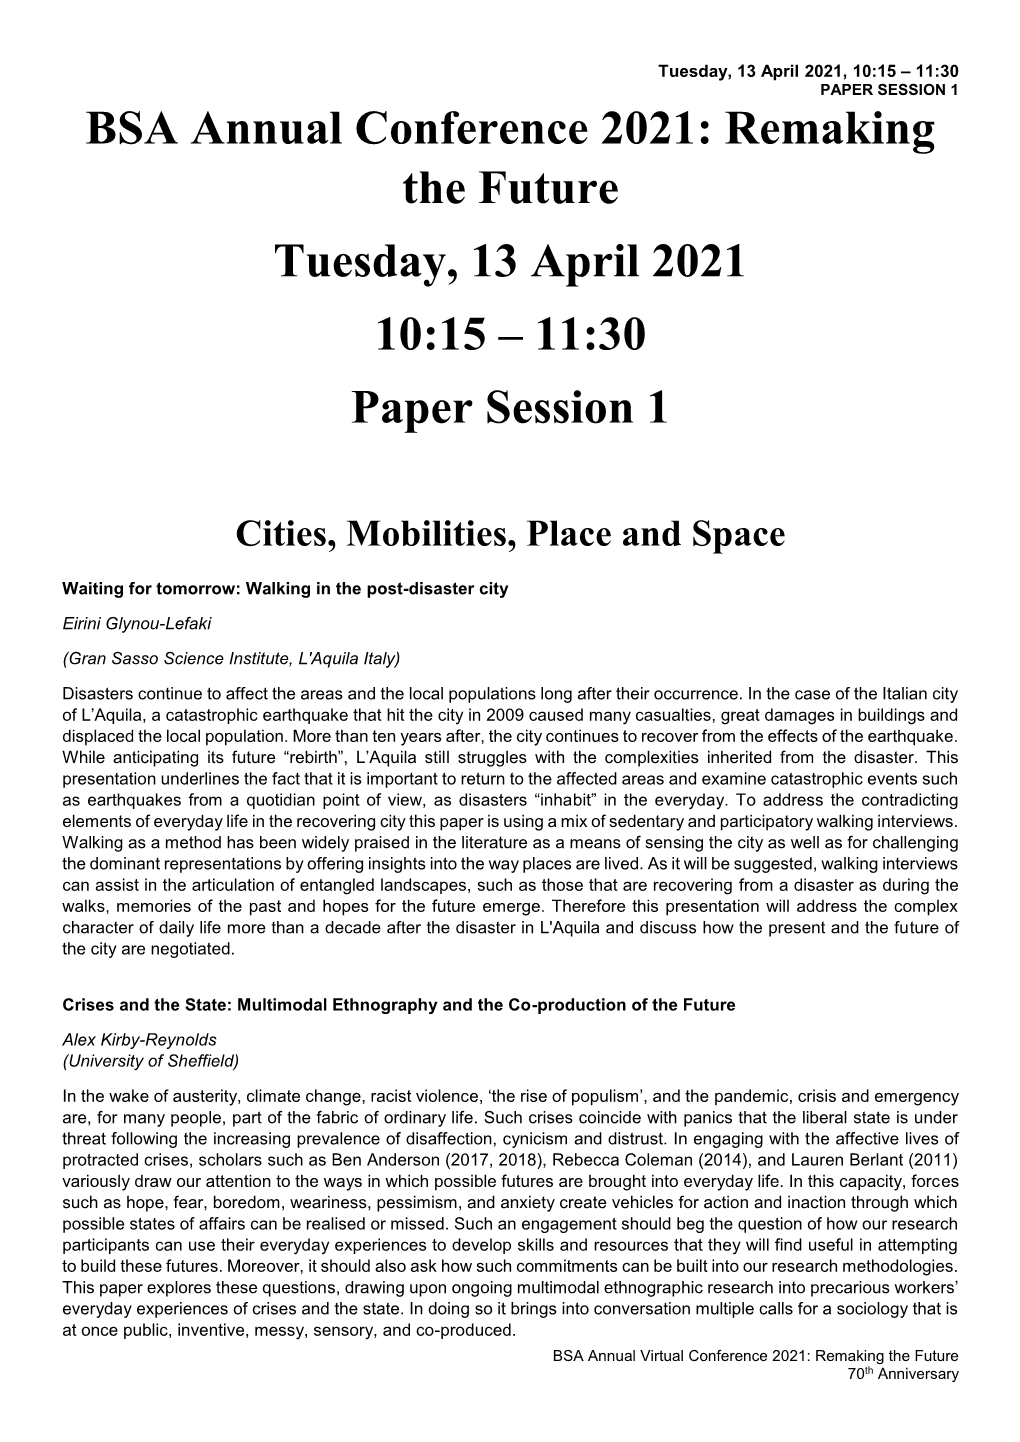 BSA Annual Conference 2021: Remaking the Future Tuesday, 13 April 2021 10:15 – 11:30 Paper Session 1